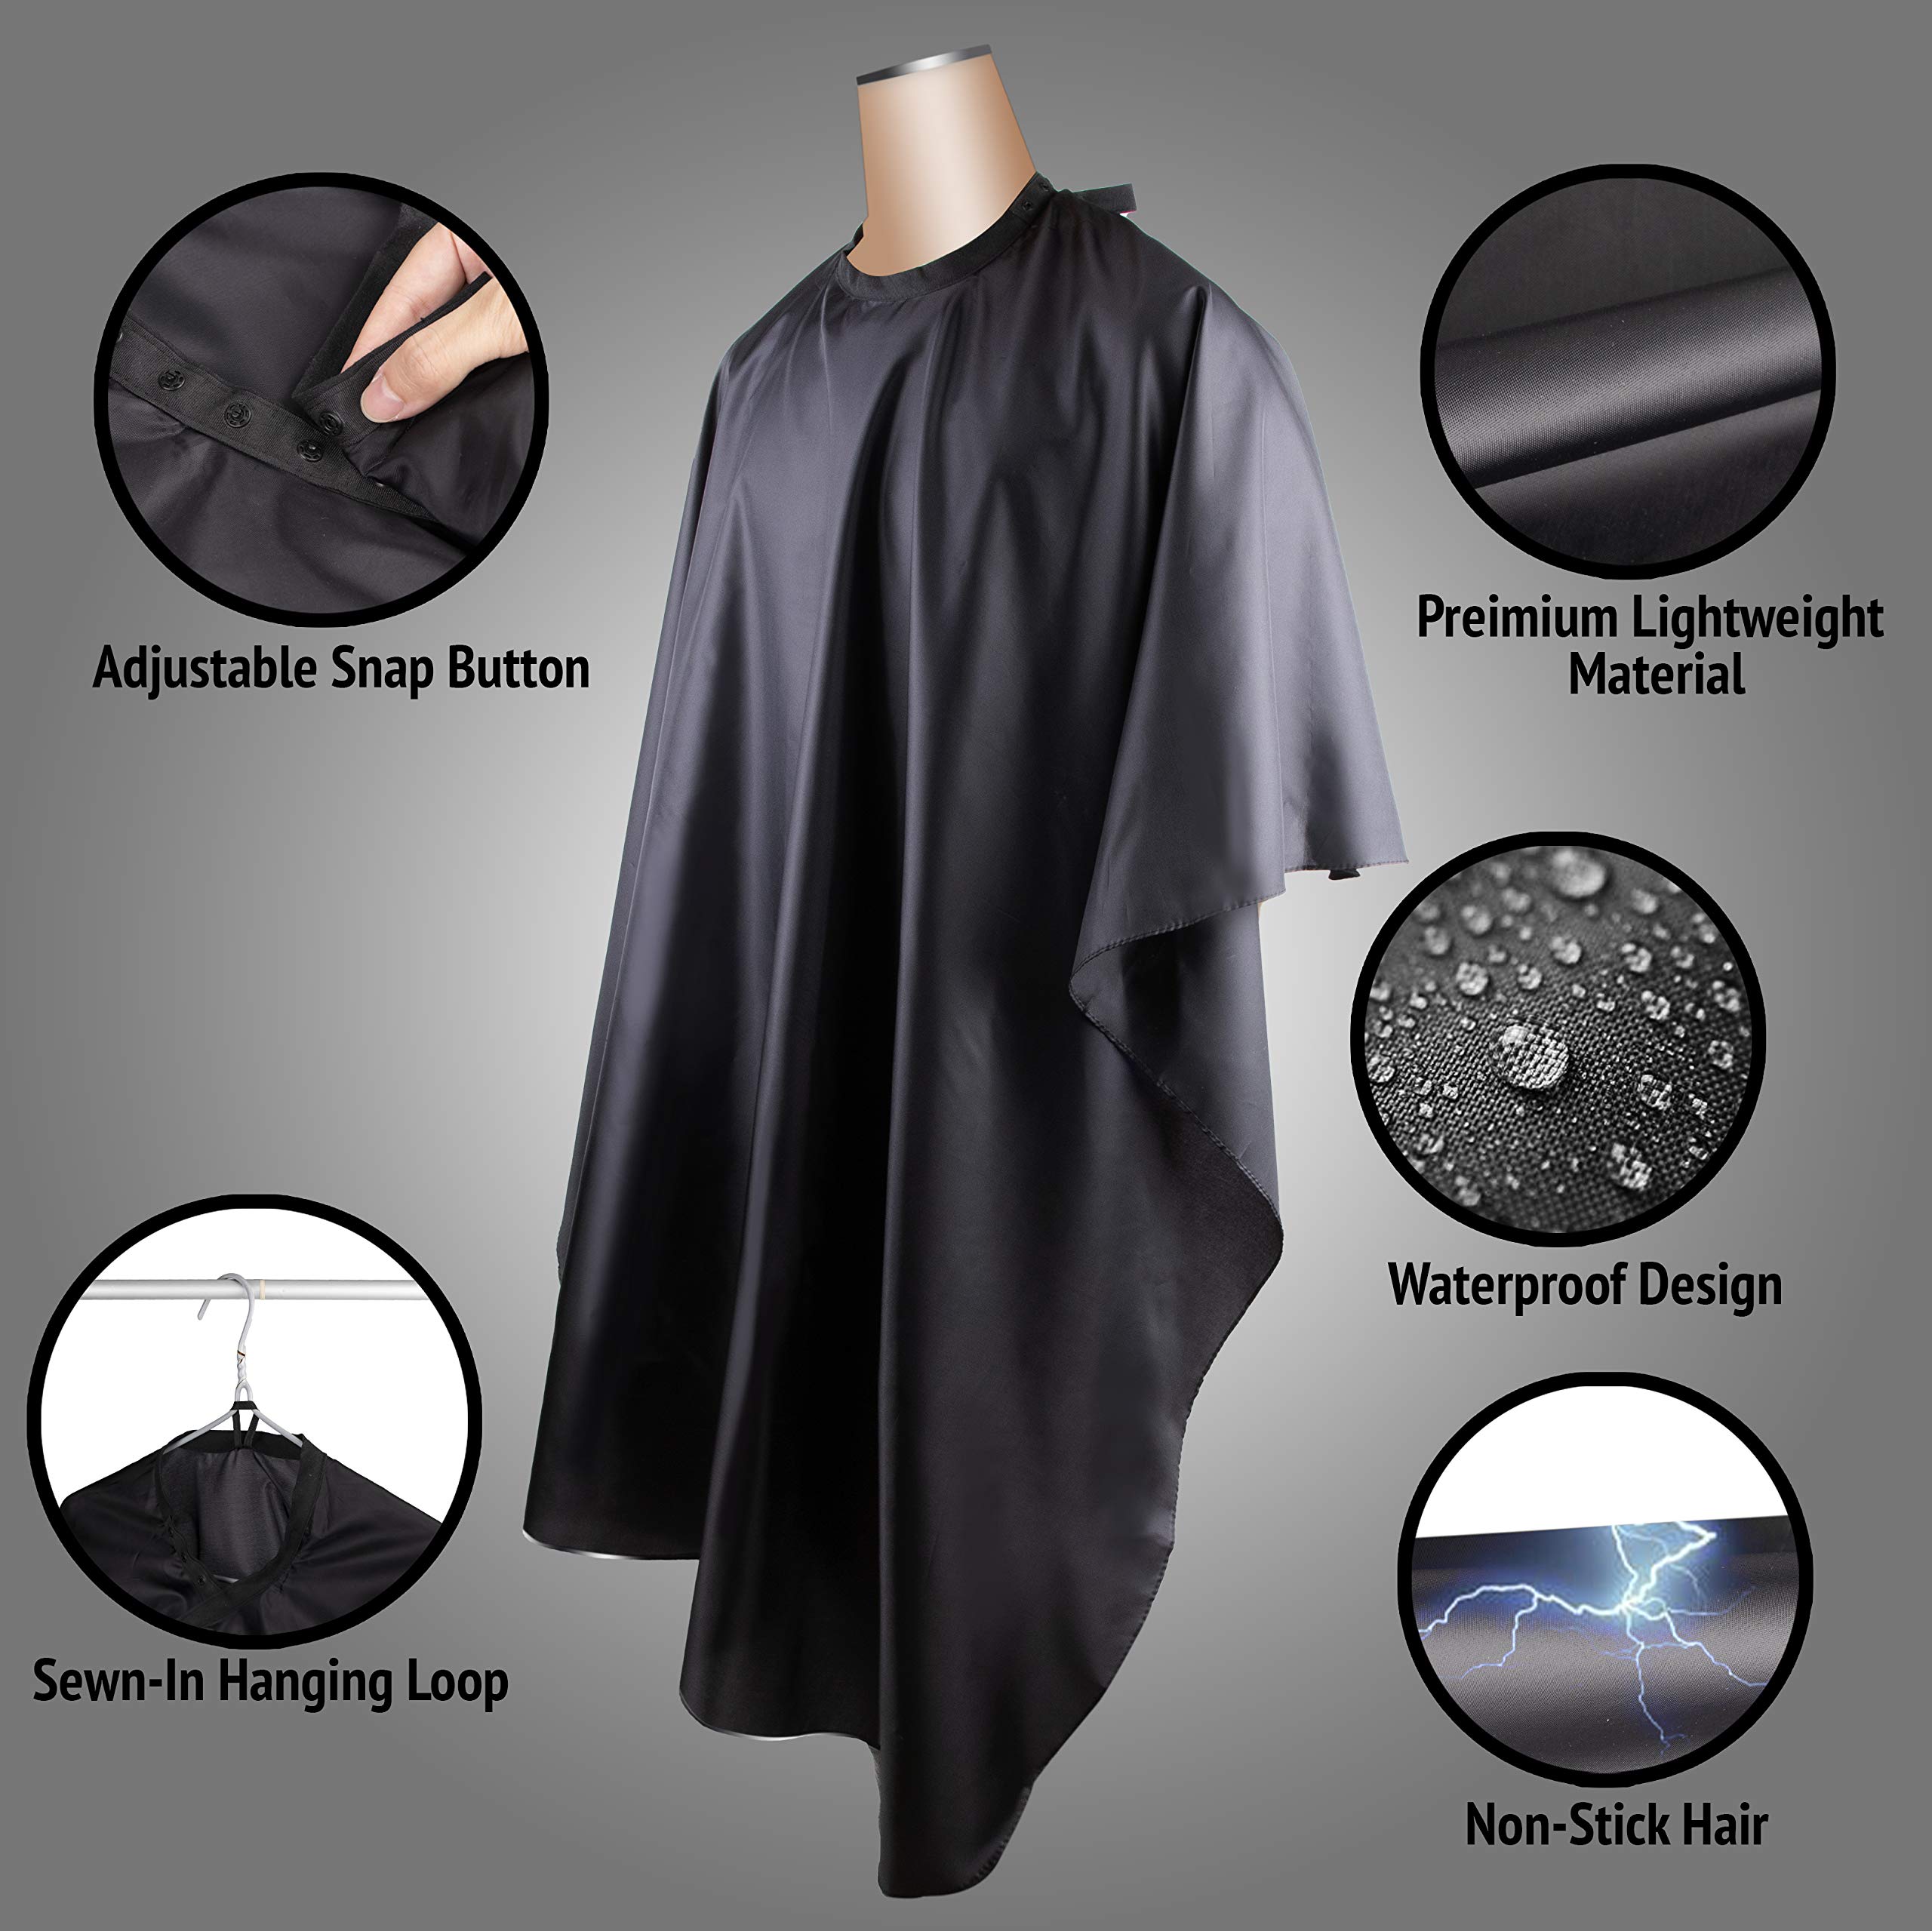 Delkinz Barber Cape Large Size with Adjustable Snap Closure waterproof Hair Cutting Salon Cape for men, women and kids black - Perfect for Hairstylists (51x59 Inch (Pack of 1))